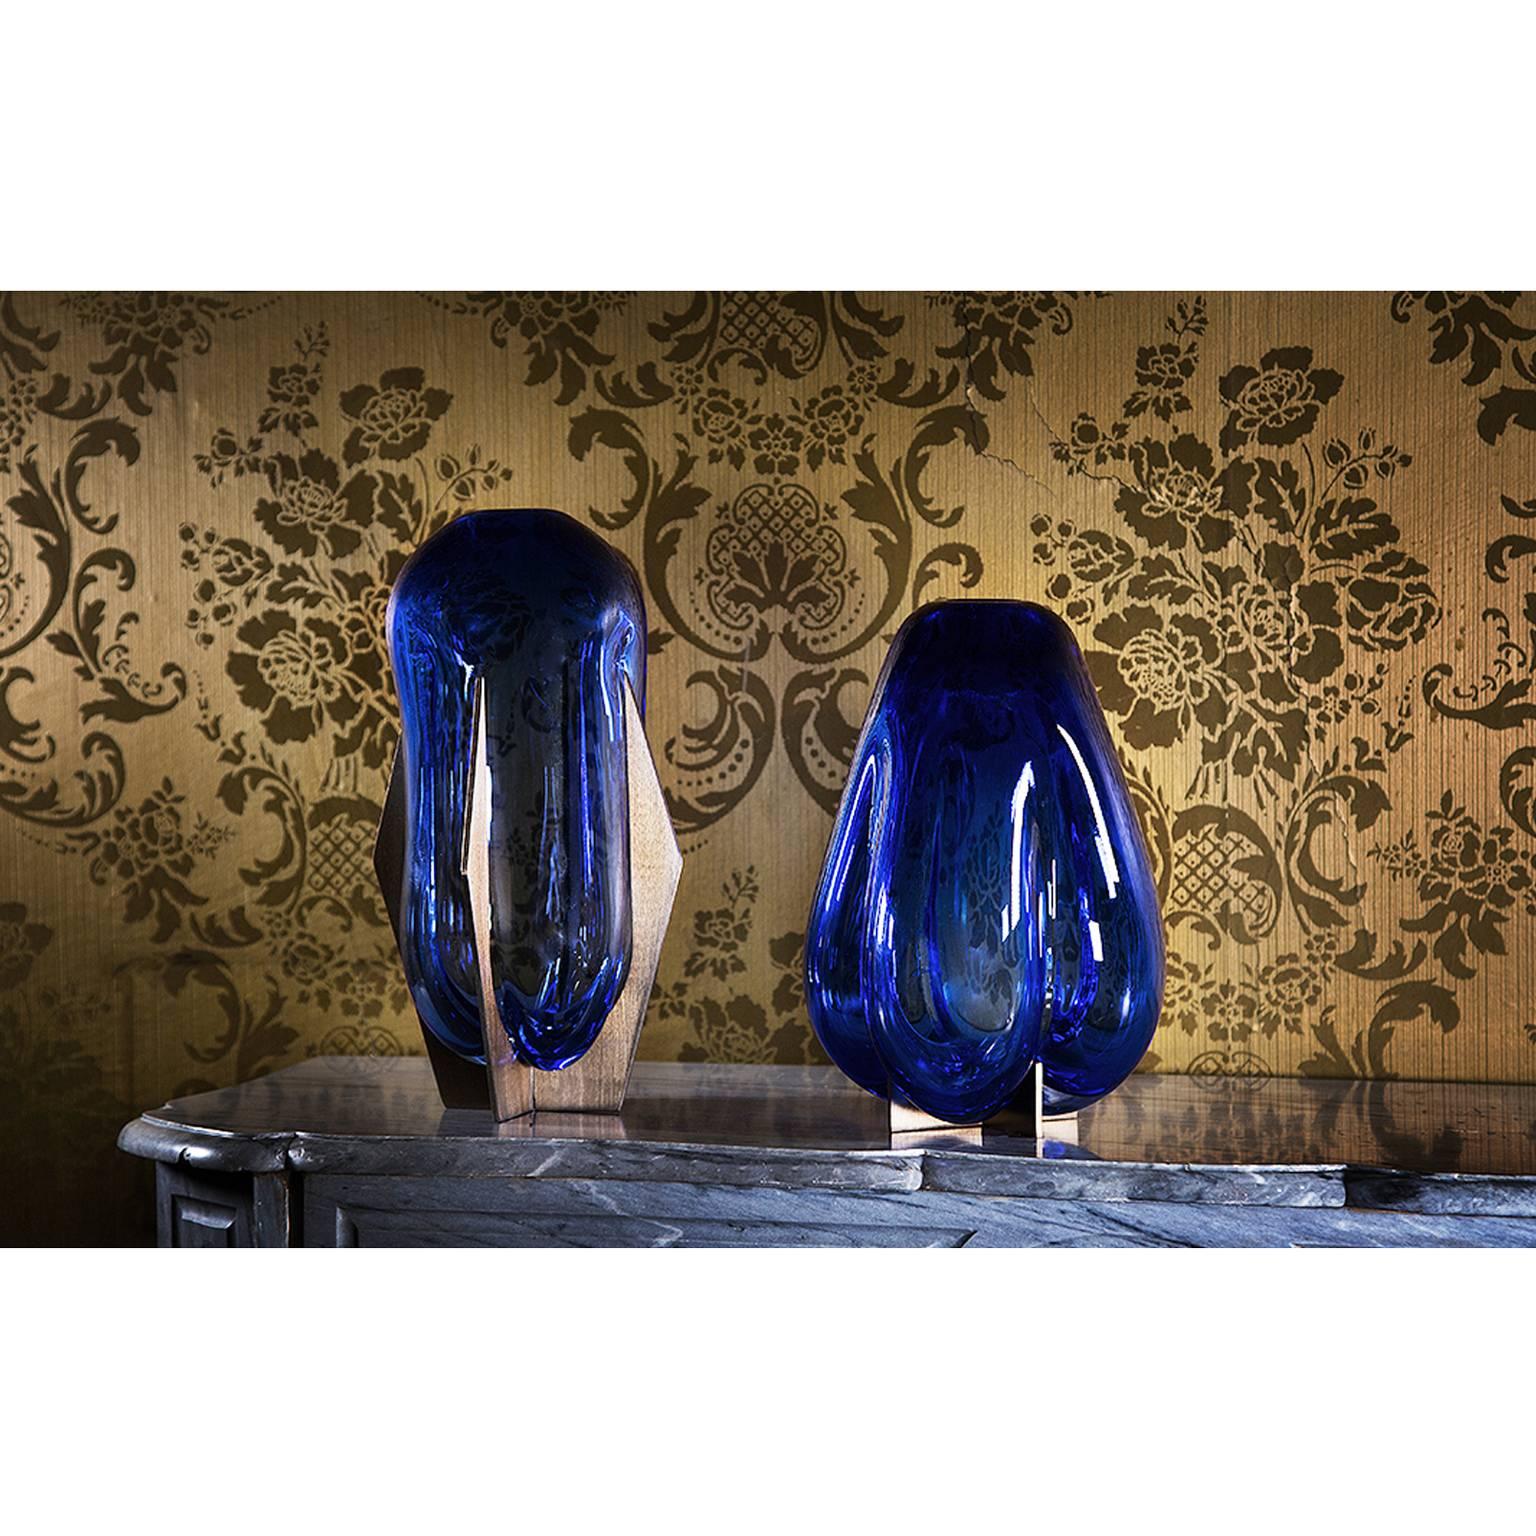 Lara Bohinc’s collection is inspired by her encounters with Venice. Metal frames hold Bohinc’s Murano glass vases and are reminiscent of the foundations upon which Venice was built: the metal is strong, rigid and geometric; the glass likes water,